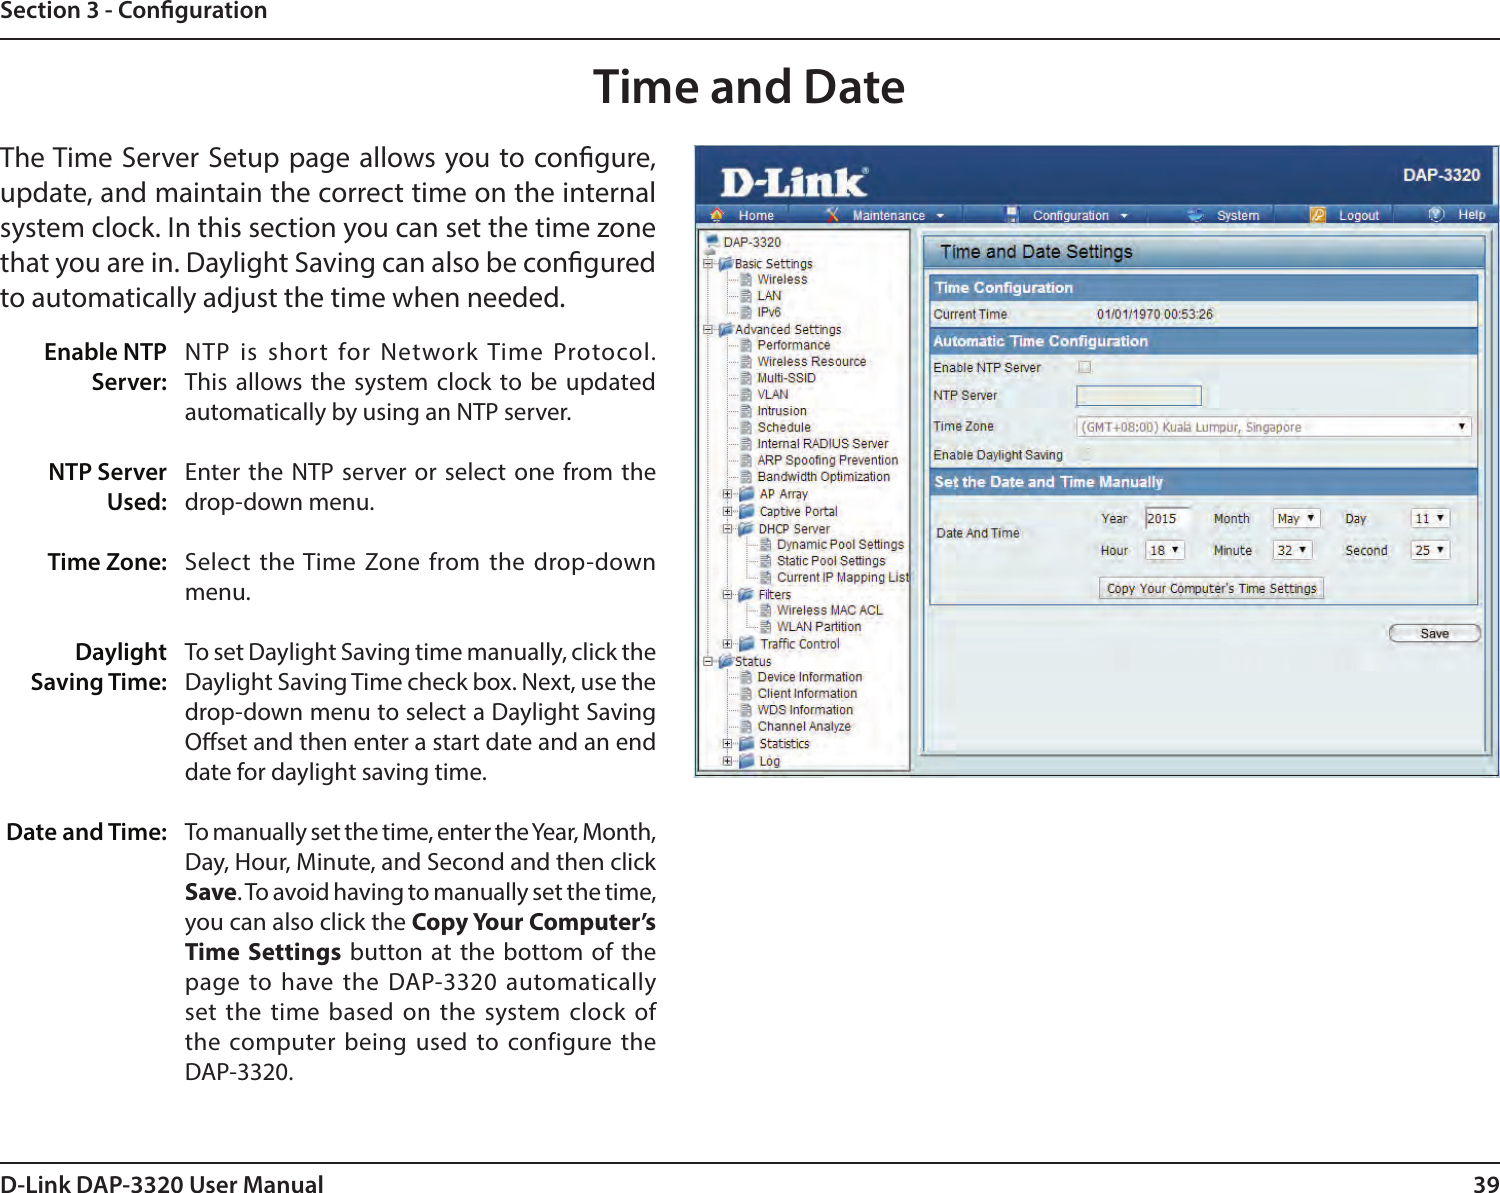 39D-Link DAP-3320 User ManualSection 3 - CongurationTime and DateEnable NTP Server:NTP Server Used:Time Zone:Daylight Saving Time:Date and Time:NTP is short for Network Time Protocol. This allows the system clock to be updated automatically by using an NTP server.Enter the NTP server or select one from the drop-down menu.Select the Time Zone from the drop-down menu.To set Daylight Saving time manually, click the Daylight Saving Time check box. Next, use the drop-down menu to select a Daylight Saving Oset and then enter a start date and an end date for daylight saving time.To manually set the time, enter the Year, Month, Day, Hour, Minute, and Second and then click Save. To avoid having to manually set the time, you can also click the Copy Your Computer’s Time Settings button at the bottom of the page to have the DAP-3320 automatically set the time based on the system clock of the computer being used to configure the DAP-3320.The Time Server Setup page allows you to congure, update, and maintain the correct time on the internal system clock. In this section you can set the time zone that you are in. Daylight Saving can also be congured to automatically adjust the time when needed.